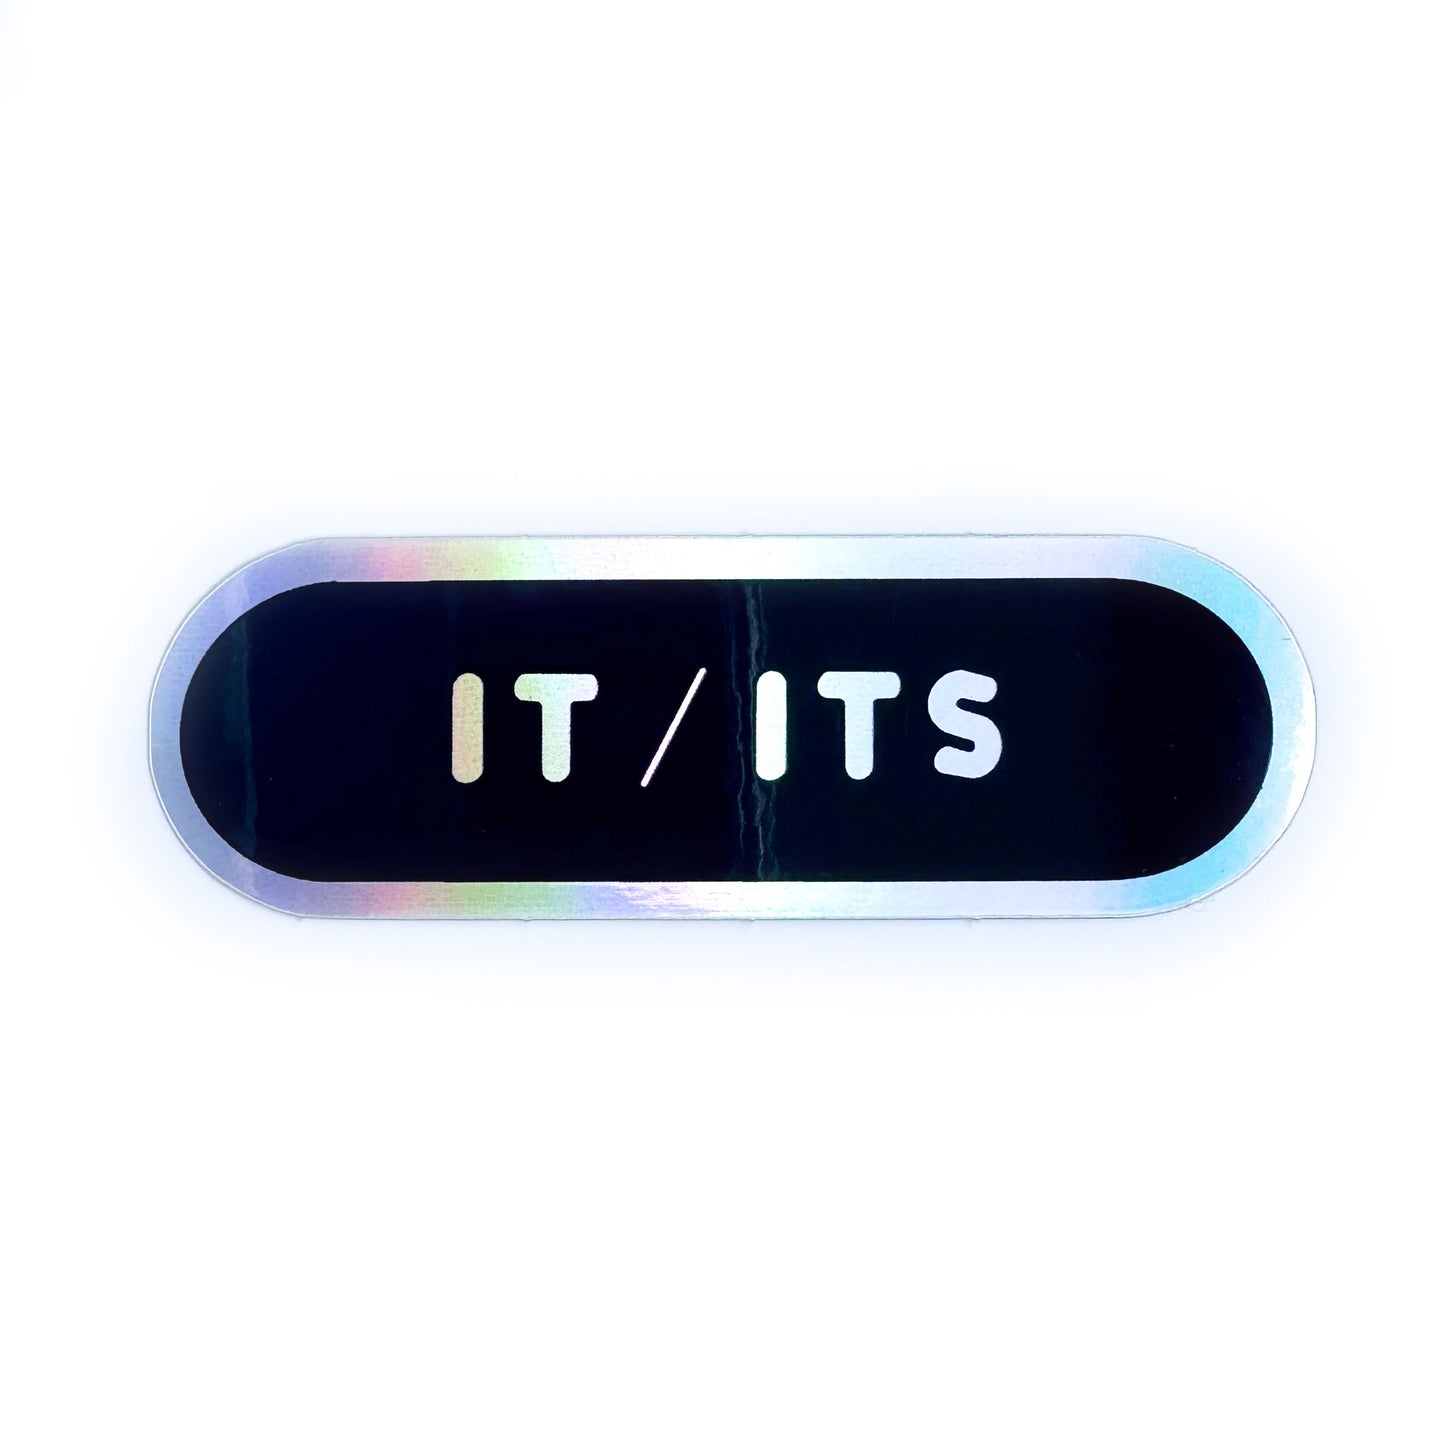 A capsule shaped holographic sticker that reads "it/its".